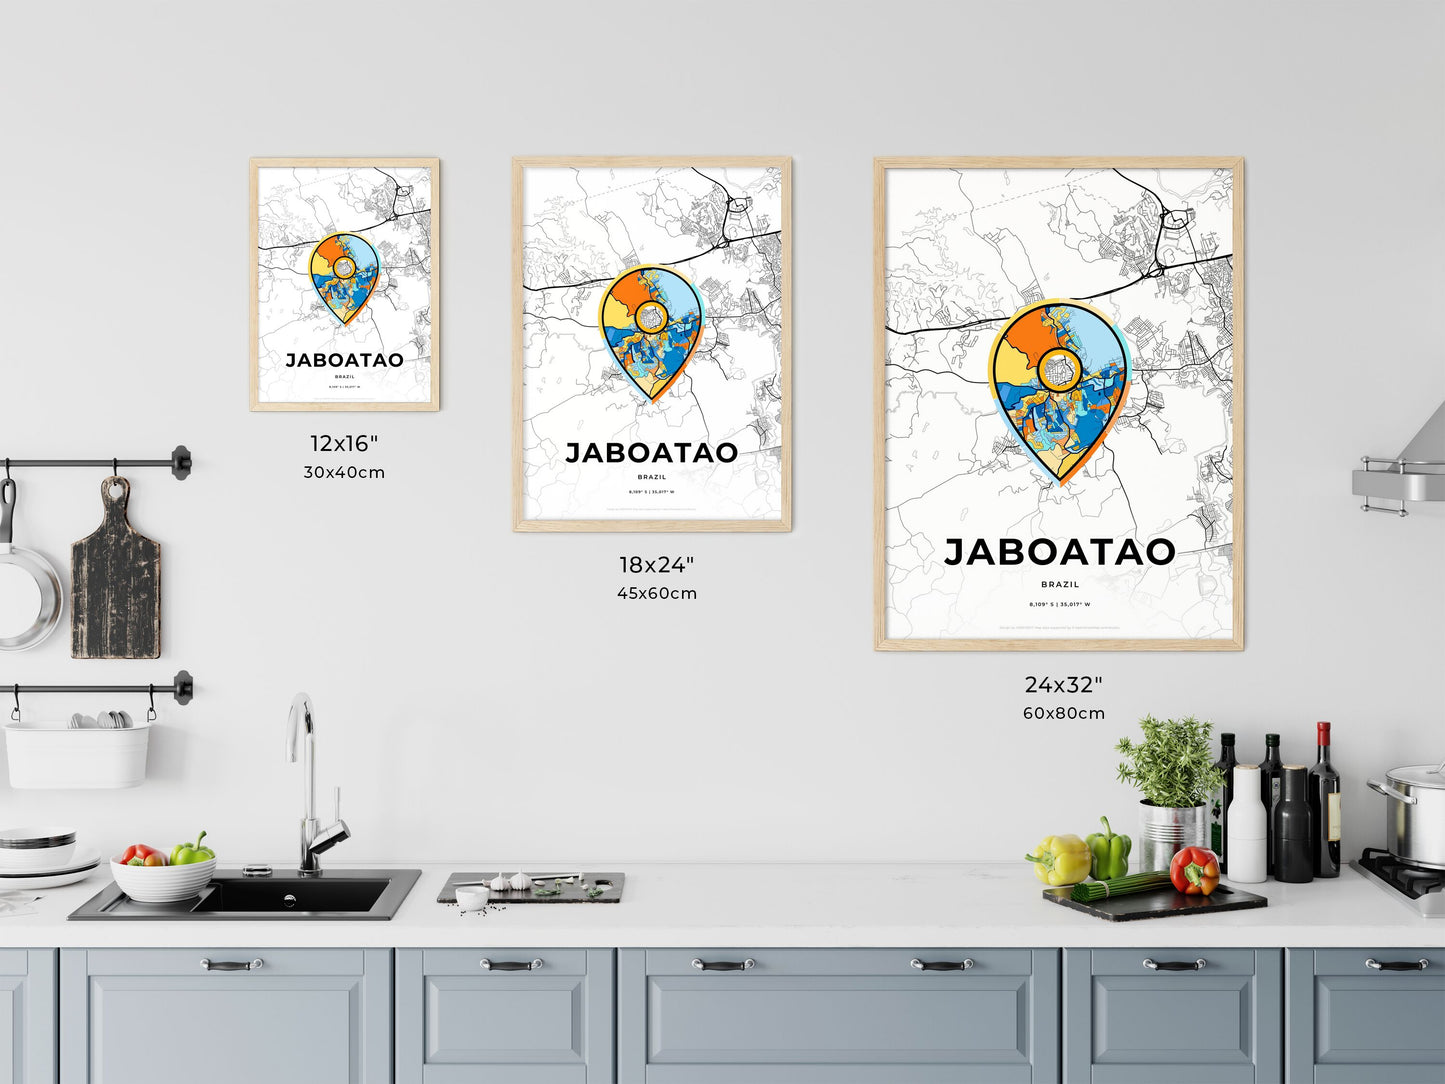 JABOATAO BRAZIL minimal art map with a colorful icon. Where it all began, Couple map gift.